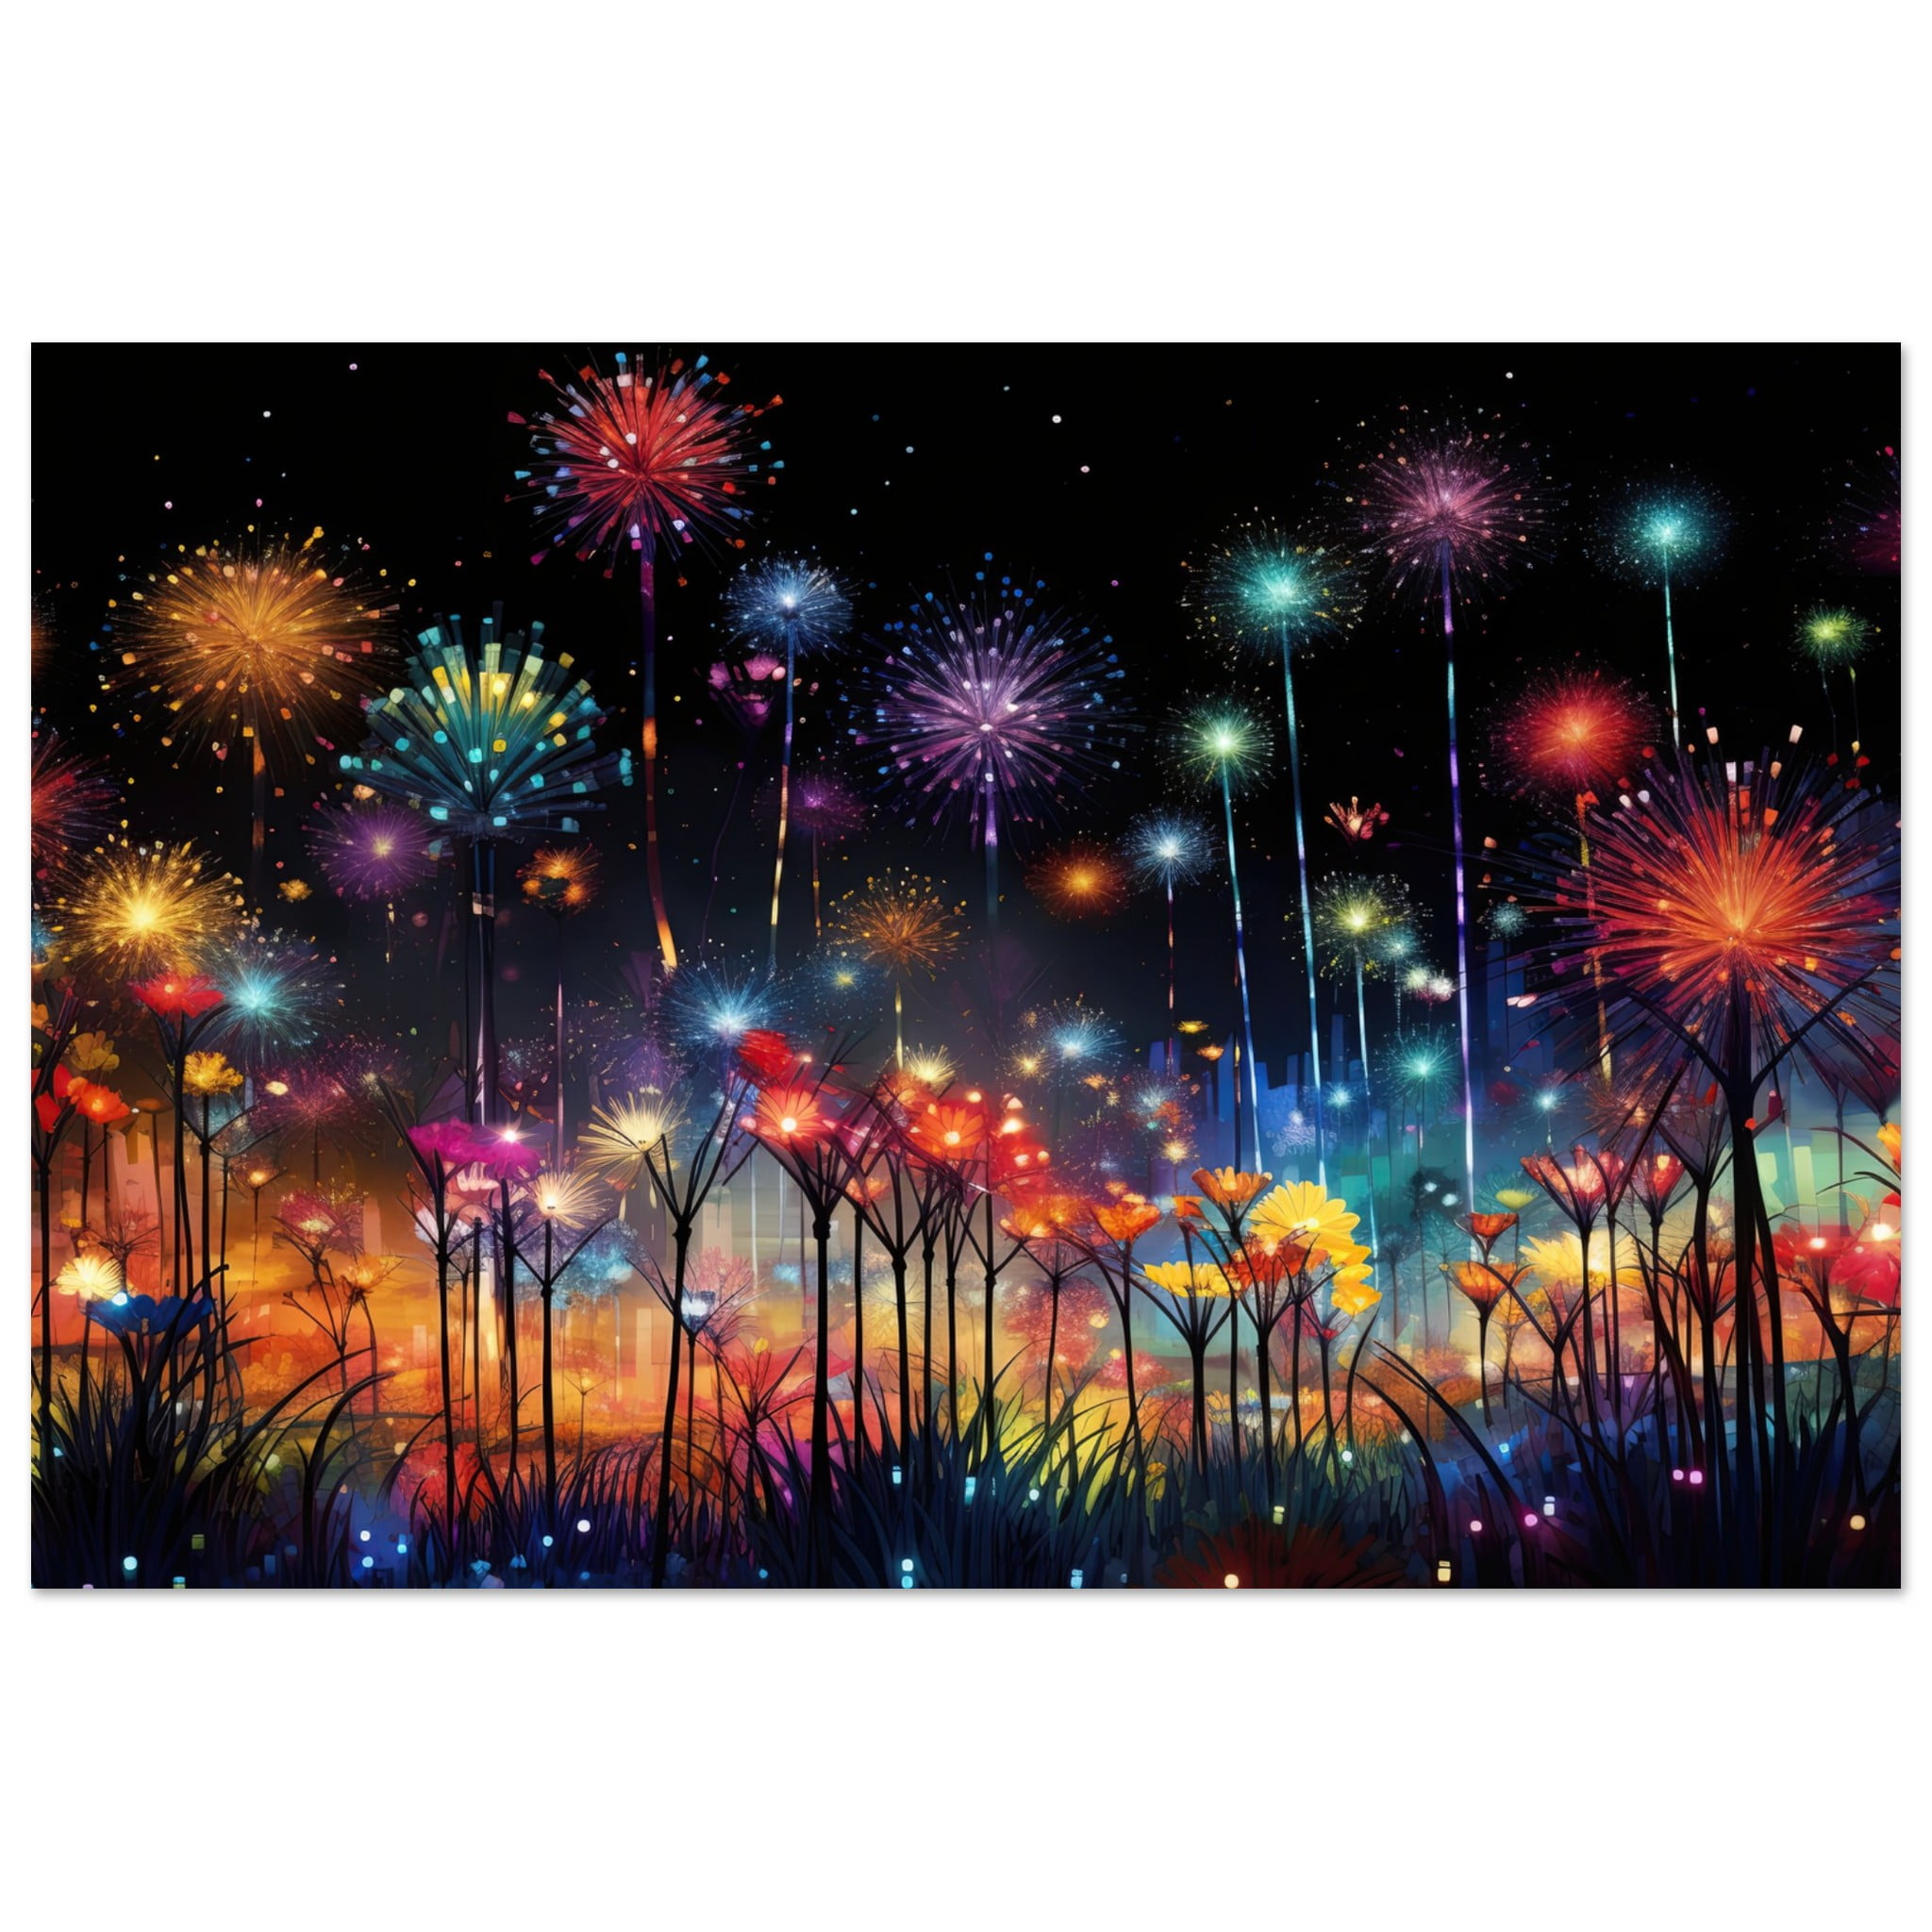 Fireworks and Flowers of Light and Color – Art Poster